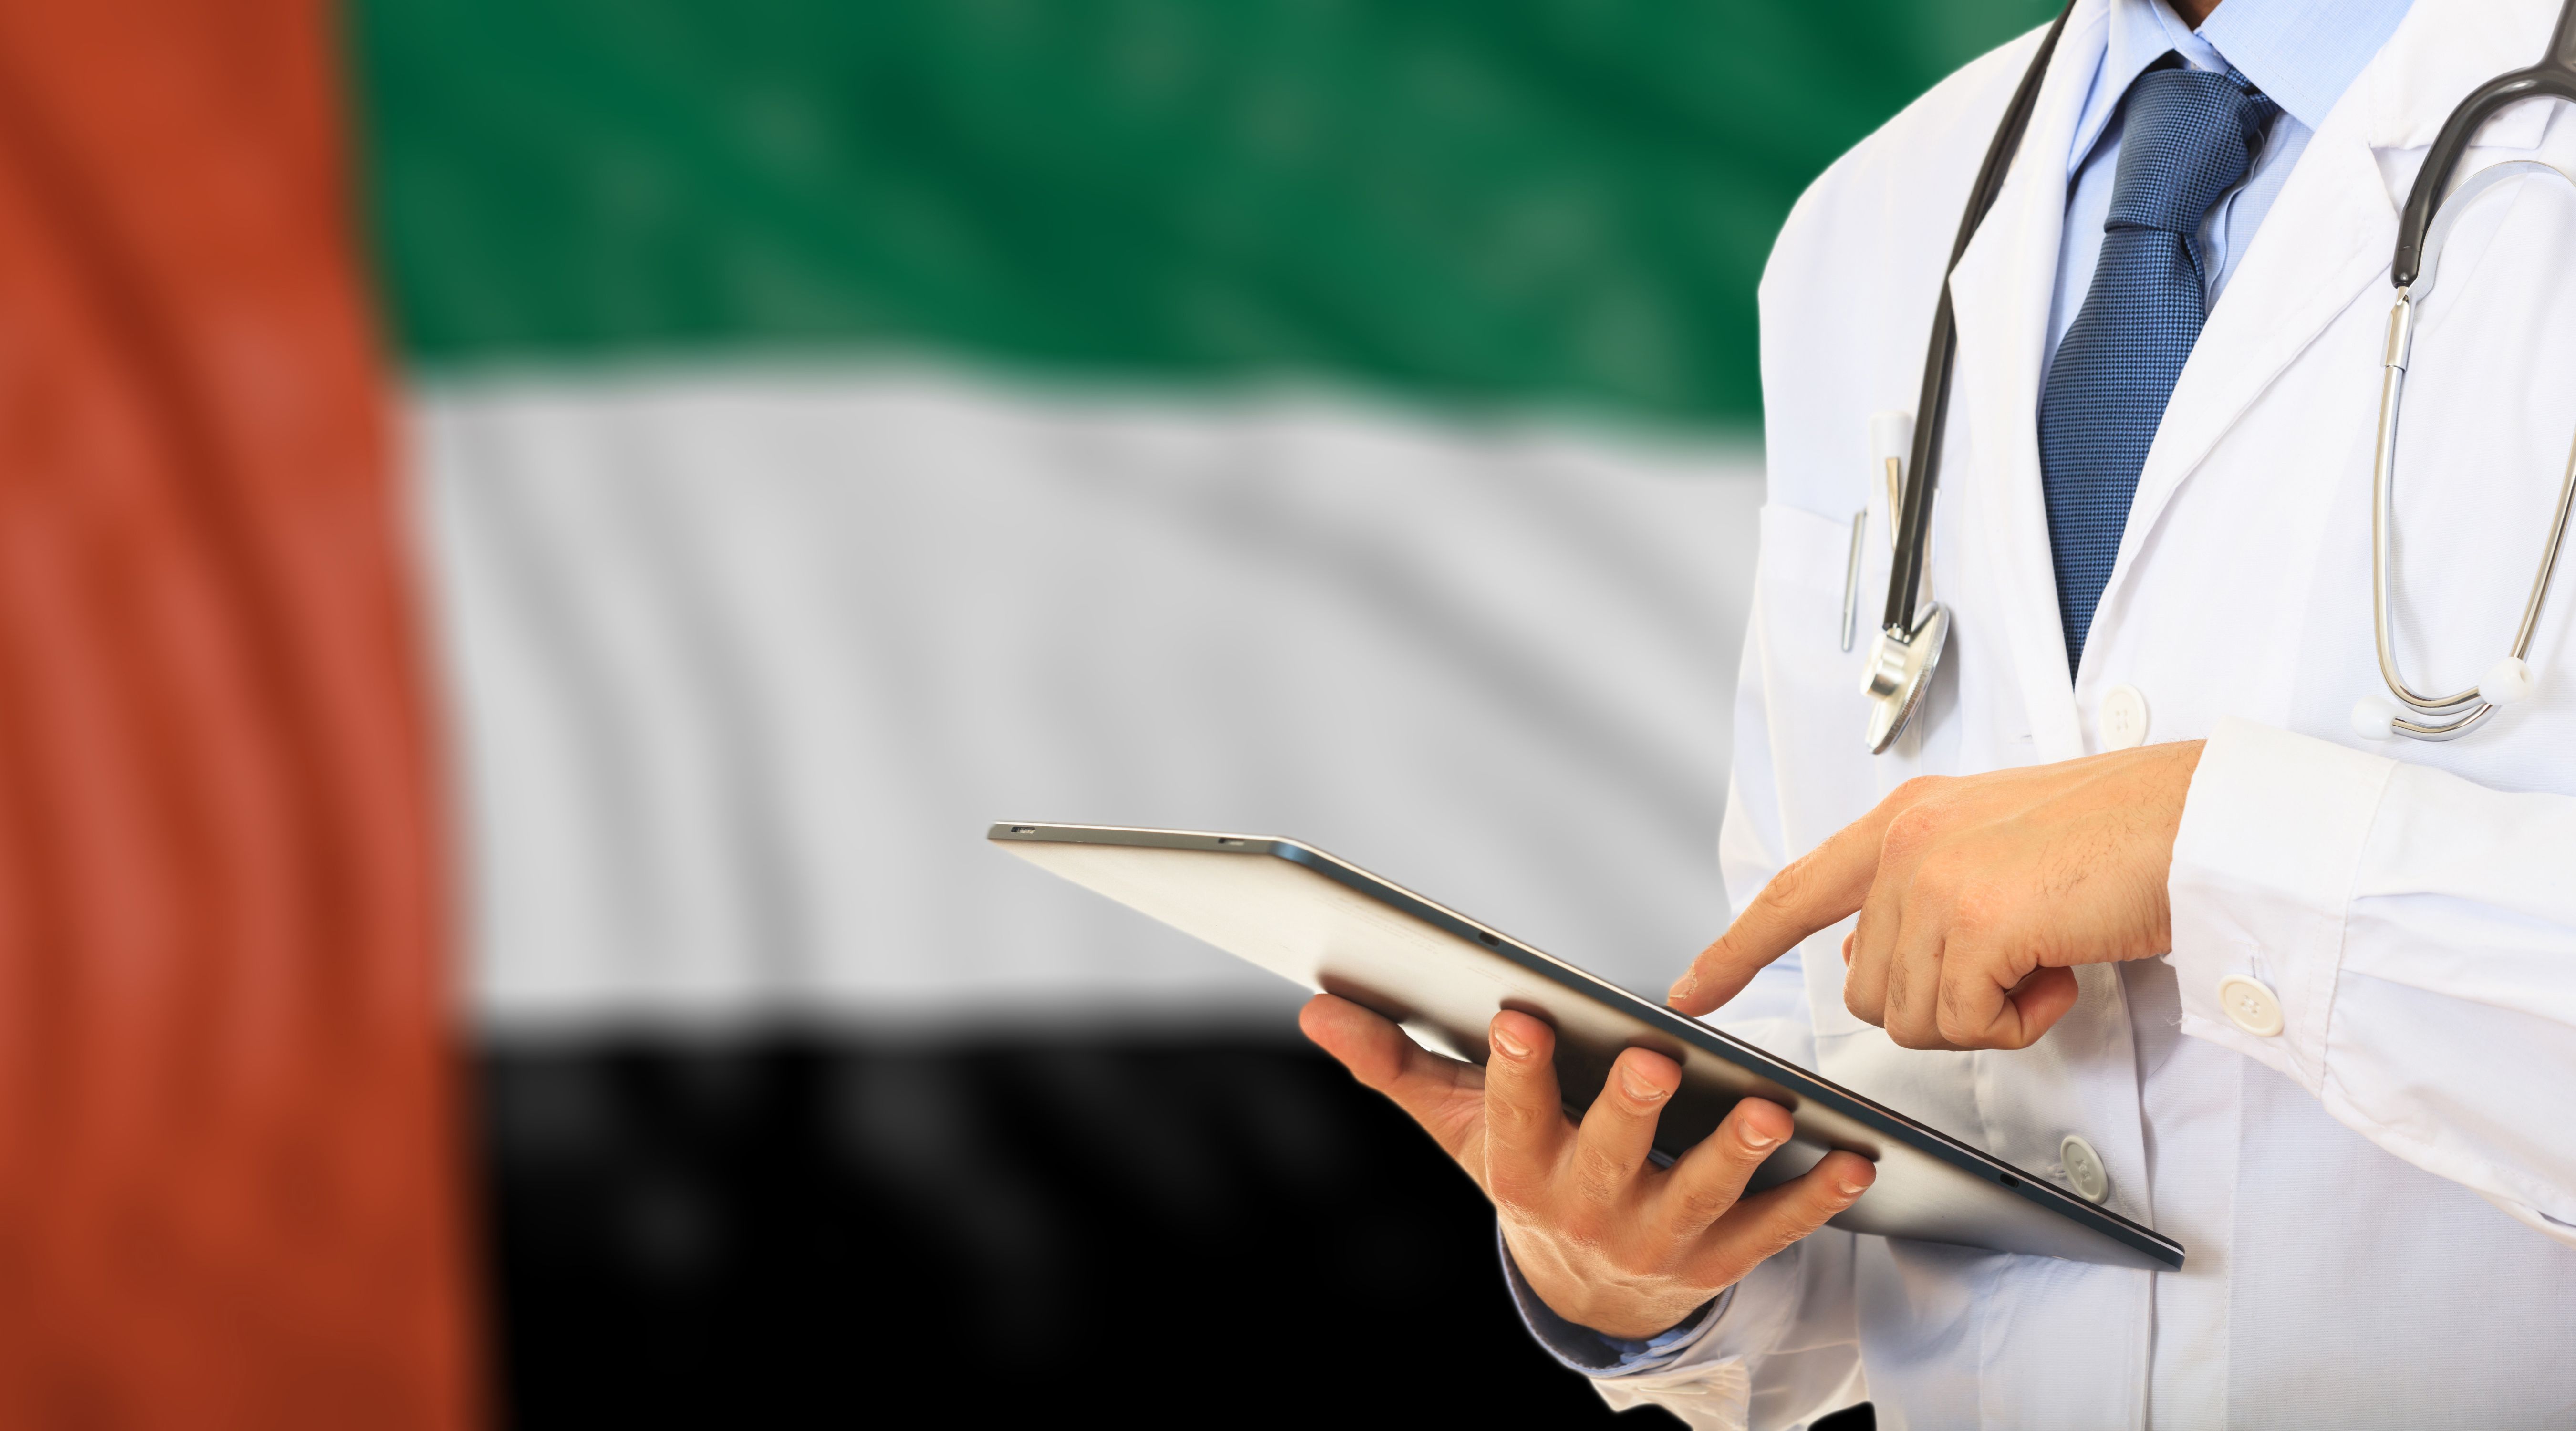 Uae Health Department To Renew Health Passes In 7 Minutes